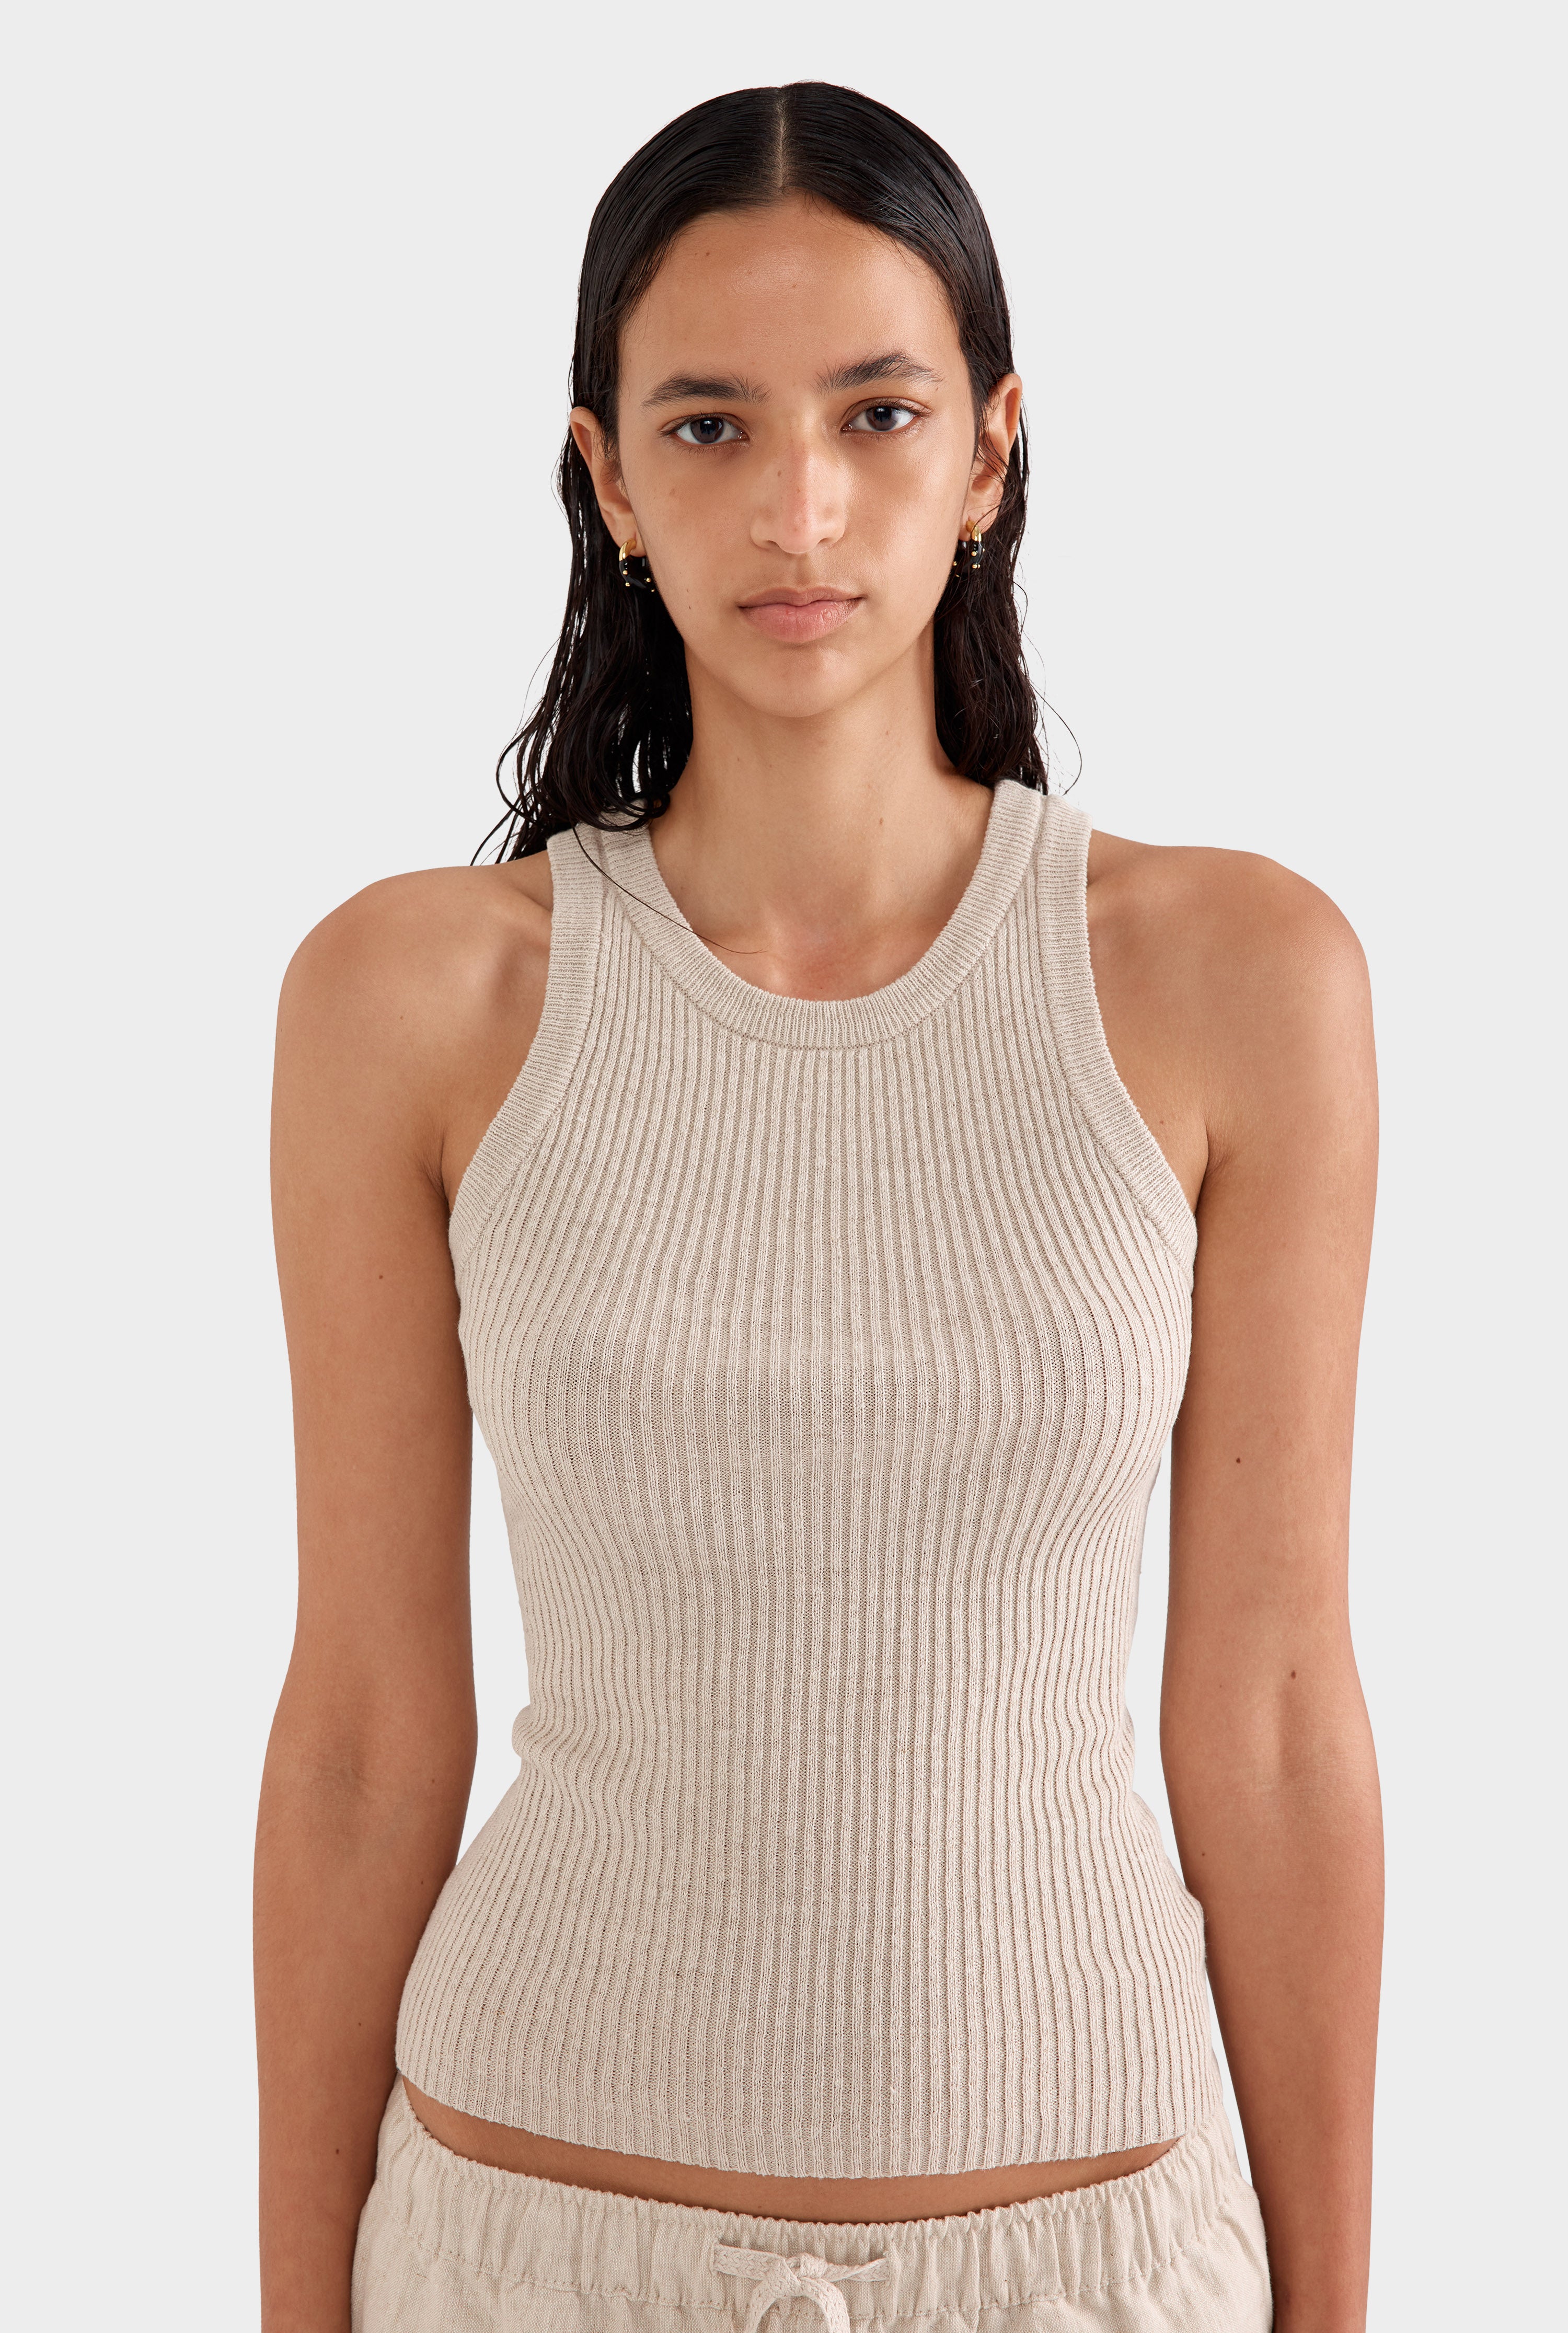 Fitted Rib Tank - Taupe